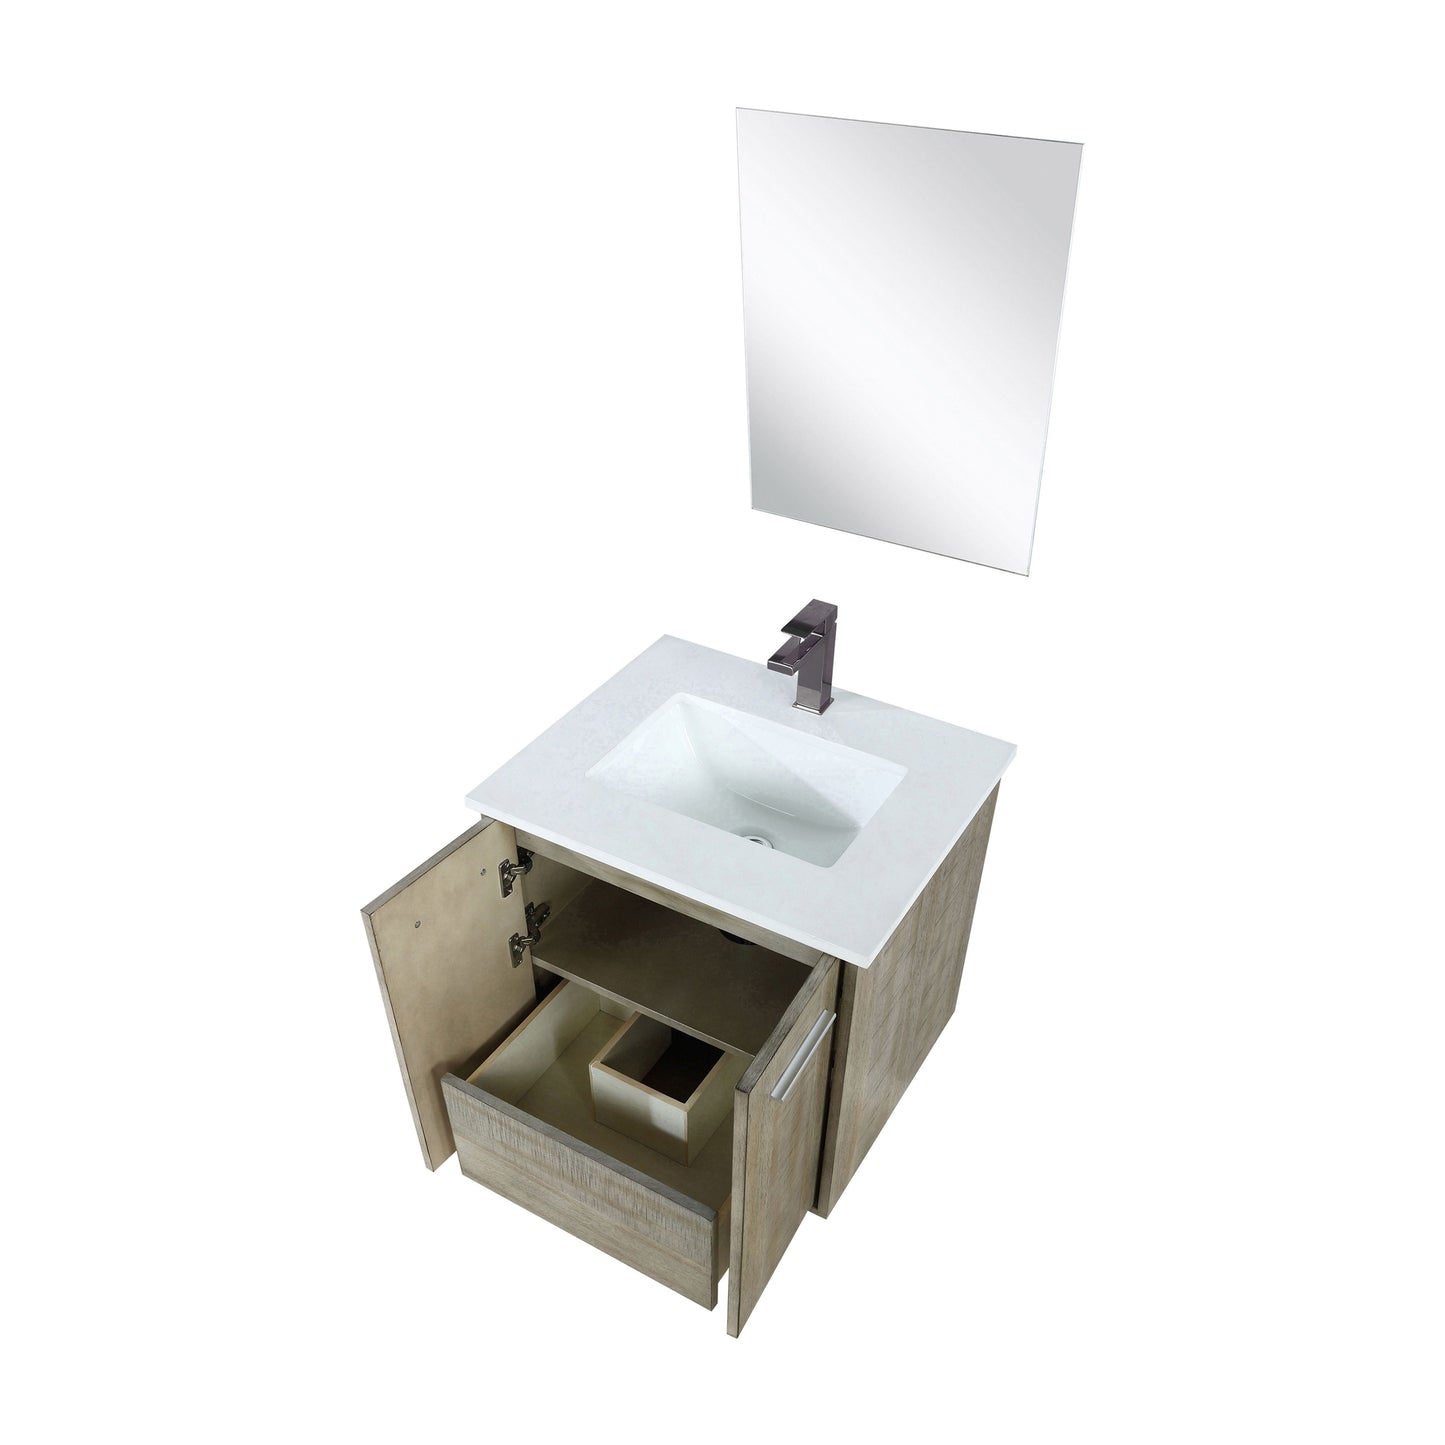 Lexora Collection Fairbanks 24 inch Rustic Acacia Bath Vanity, Cultured Marble Top, Faucet Set and 18 inch Mirror - Luxe Bathroom Vanities